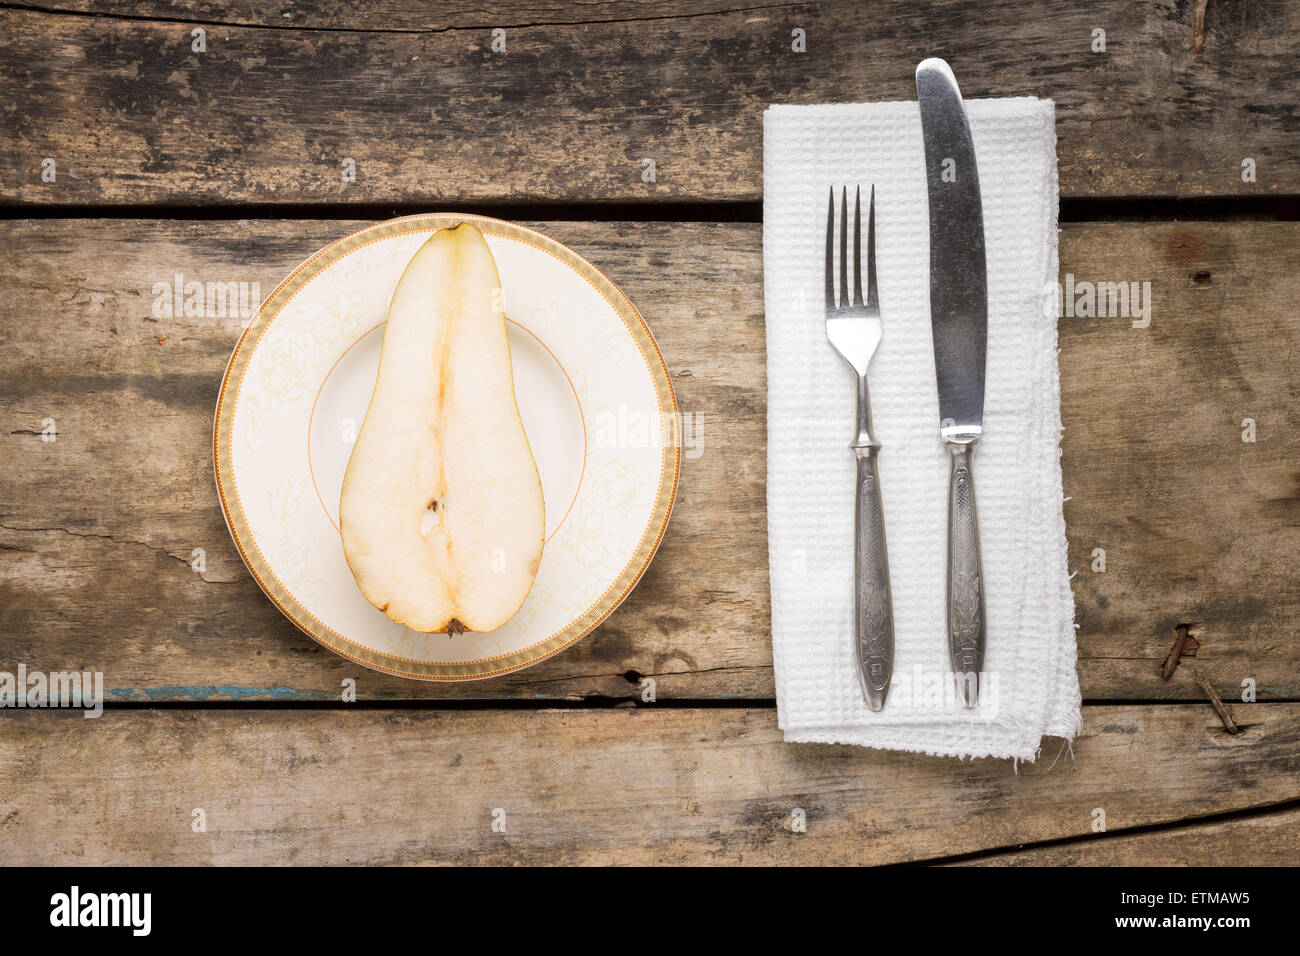 Cut in half big pear fruit with silverware on wooden table. Top view image dessert background. Stock Photo